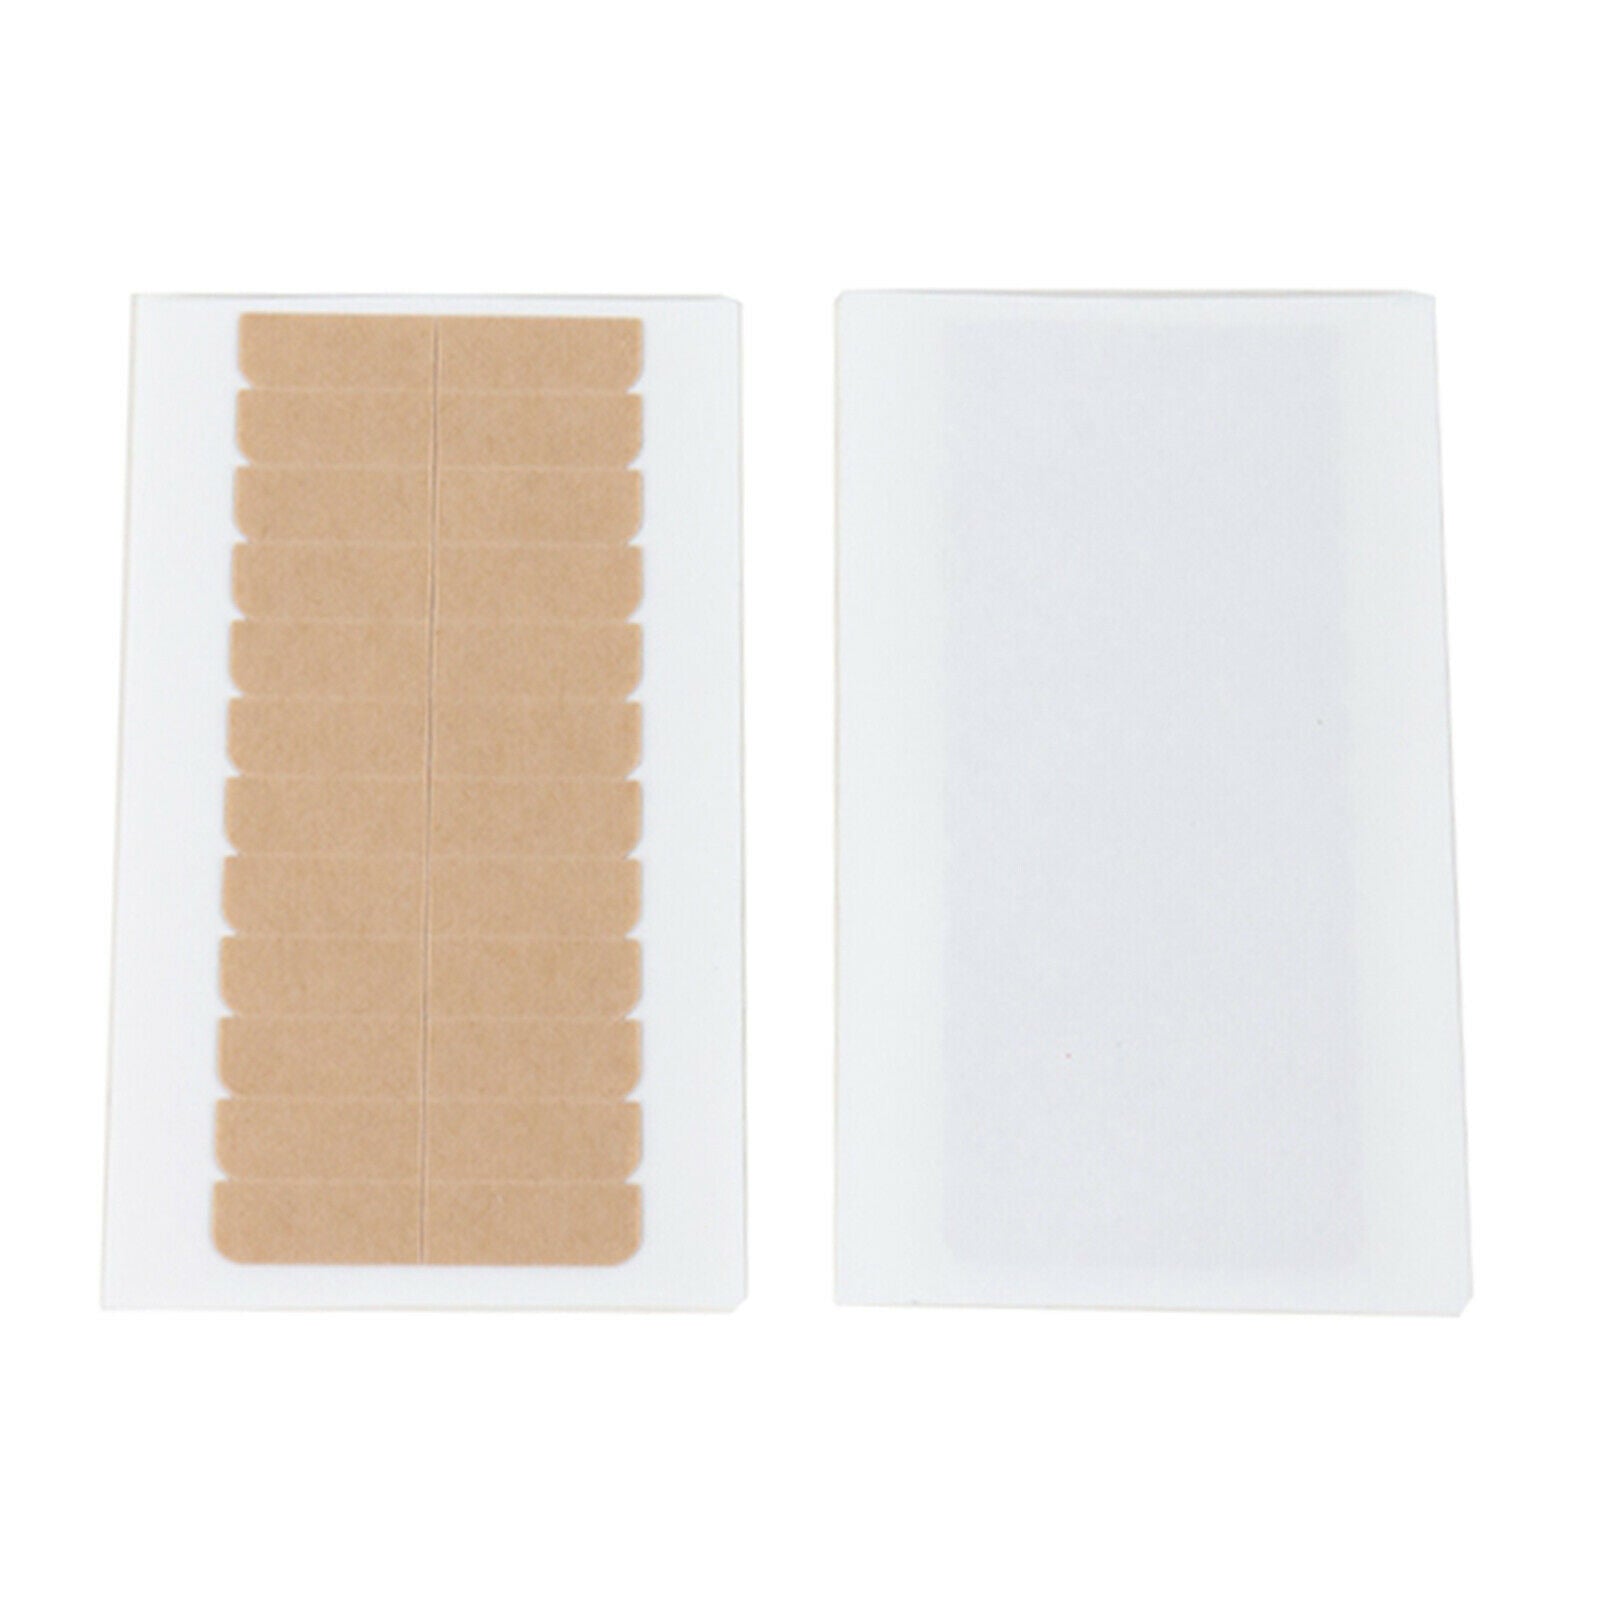 60x Pre-Cut Double Sided Adhesive Super Tape for Skin Weft Hair Extensions